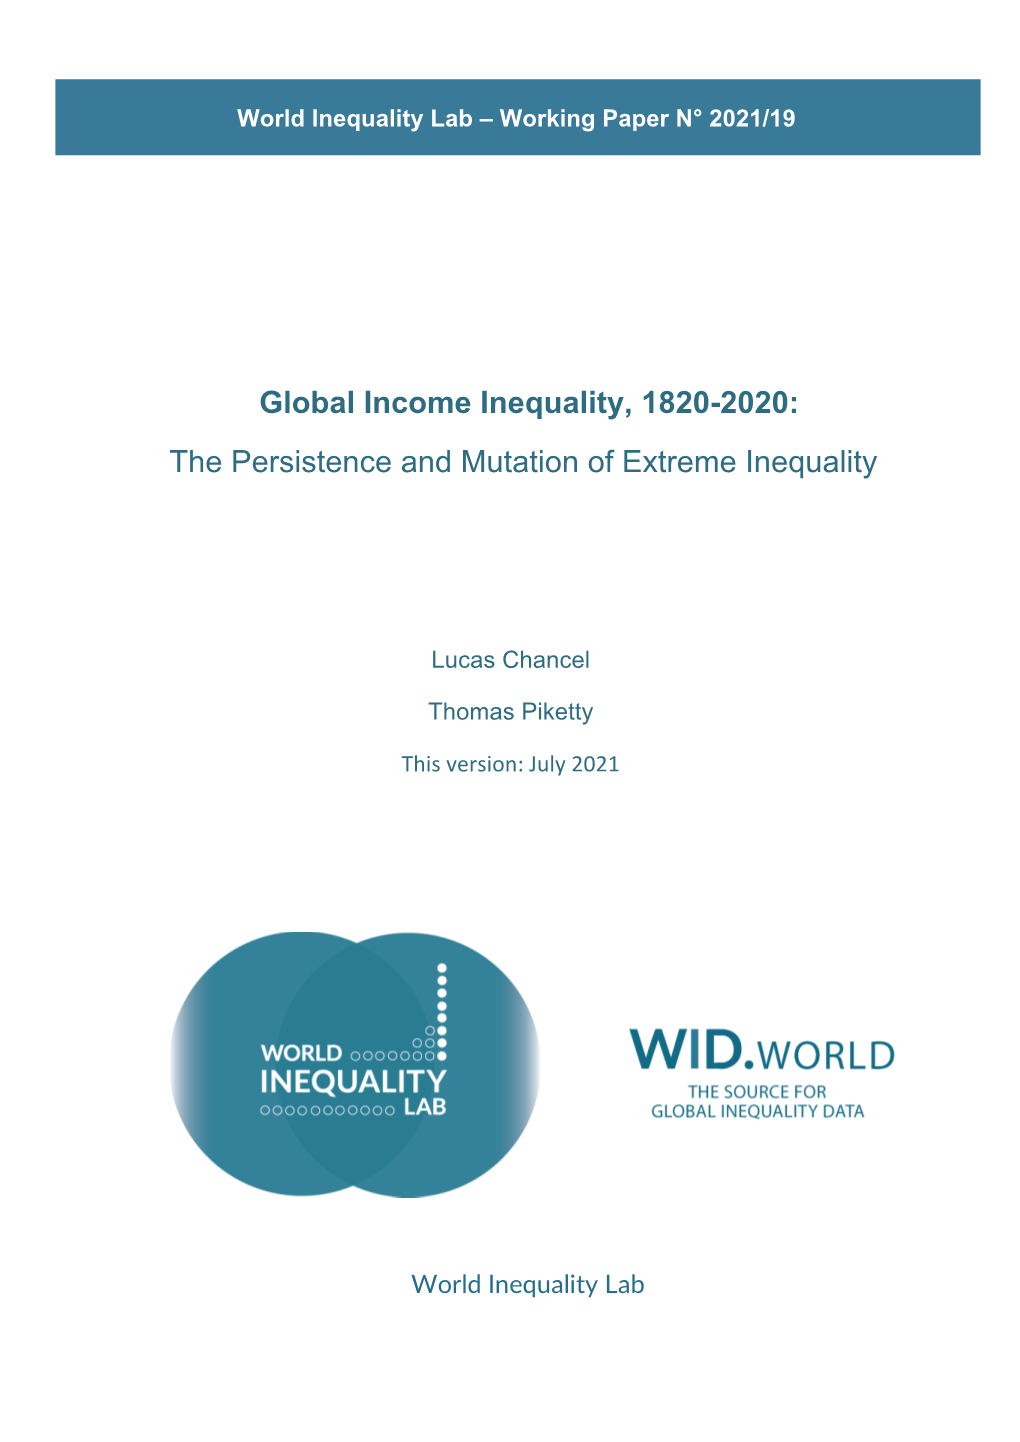 Global Income Inequality, 1820-2020: the Persistence and Mutation of Extreme Inequality